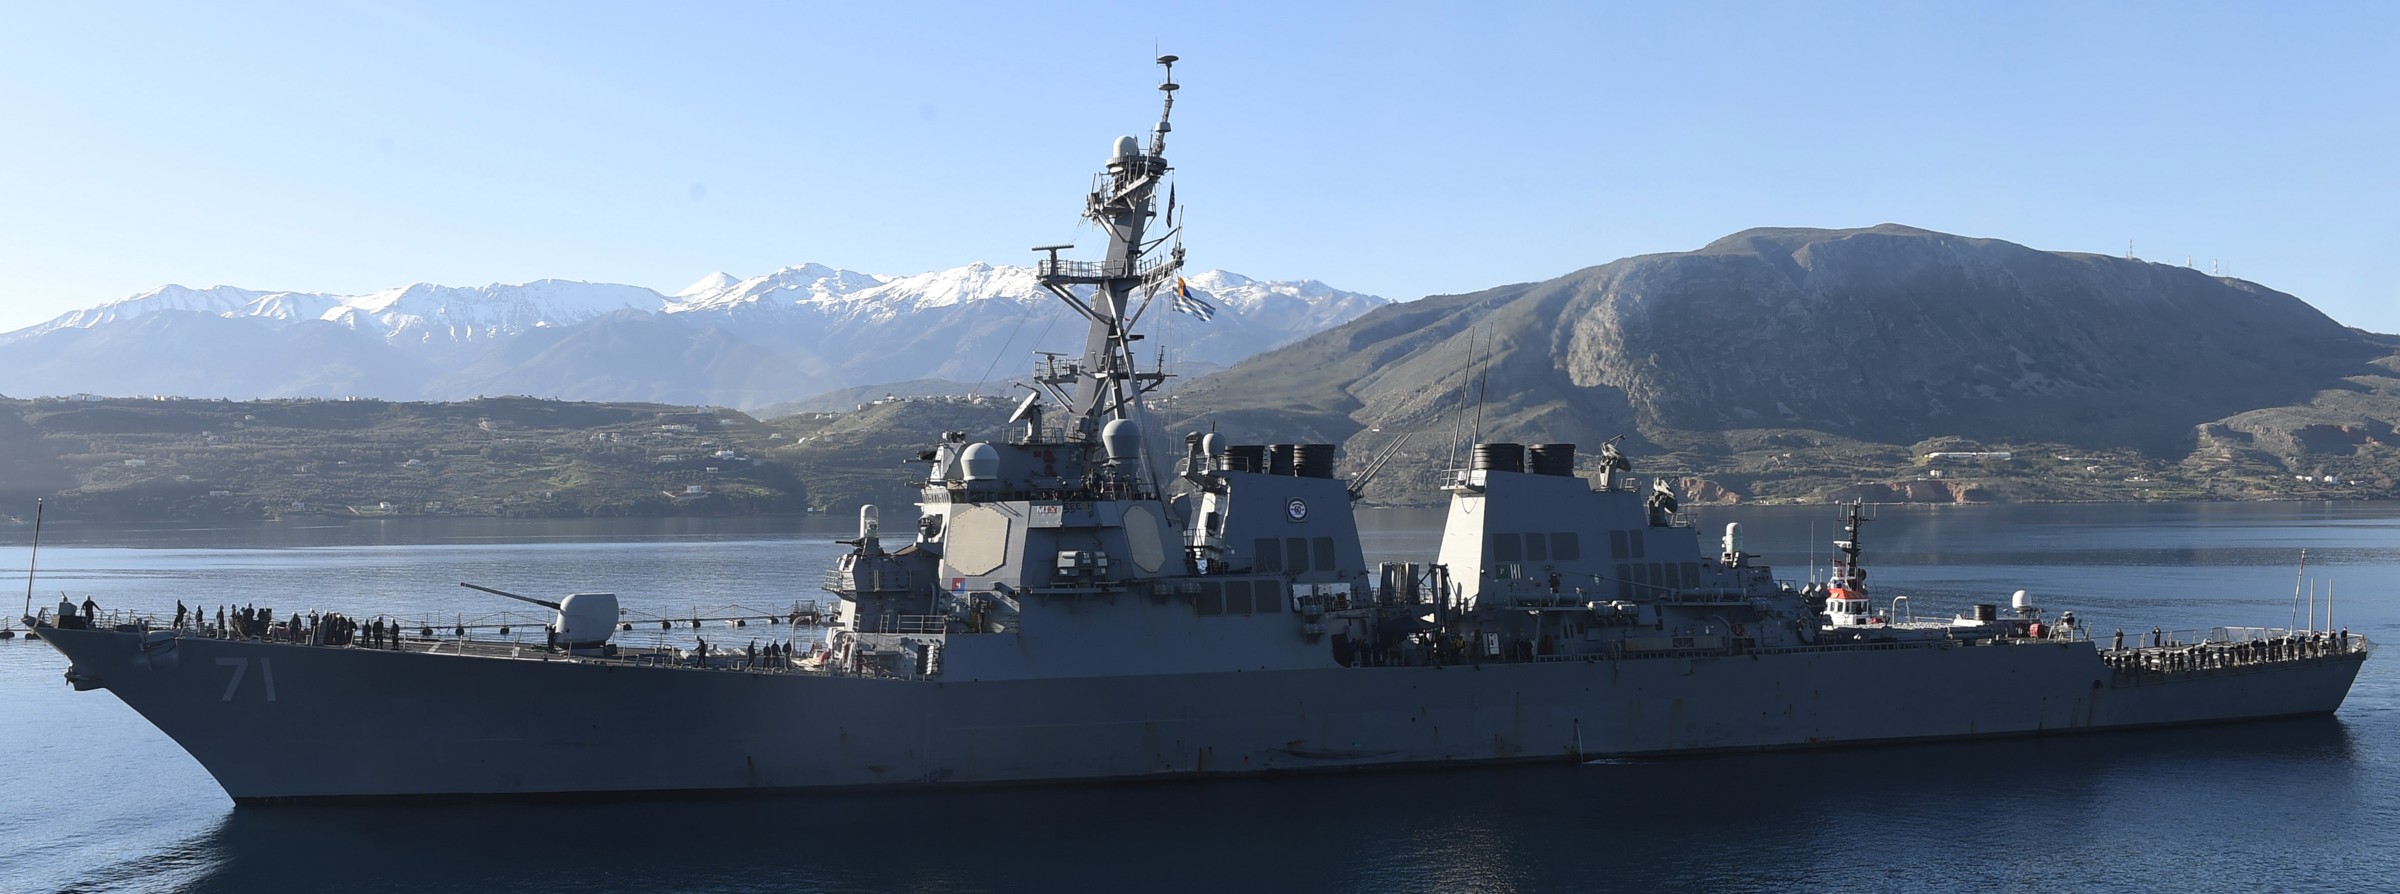 ddg-71 uss ross guided missile destroyer arleigh burke class aegis bmd 45